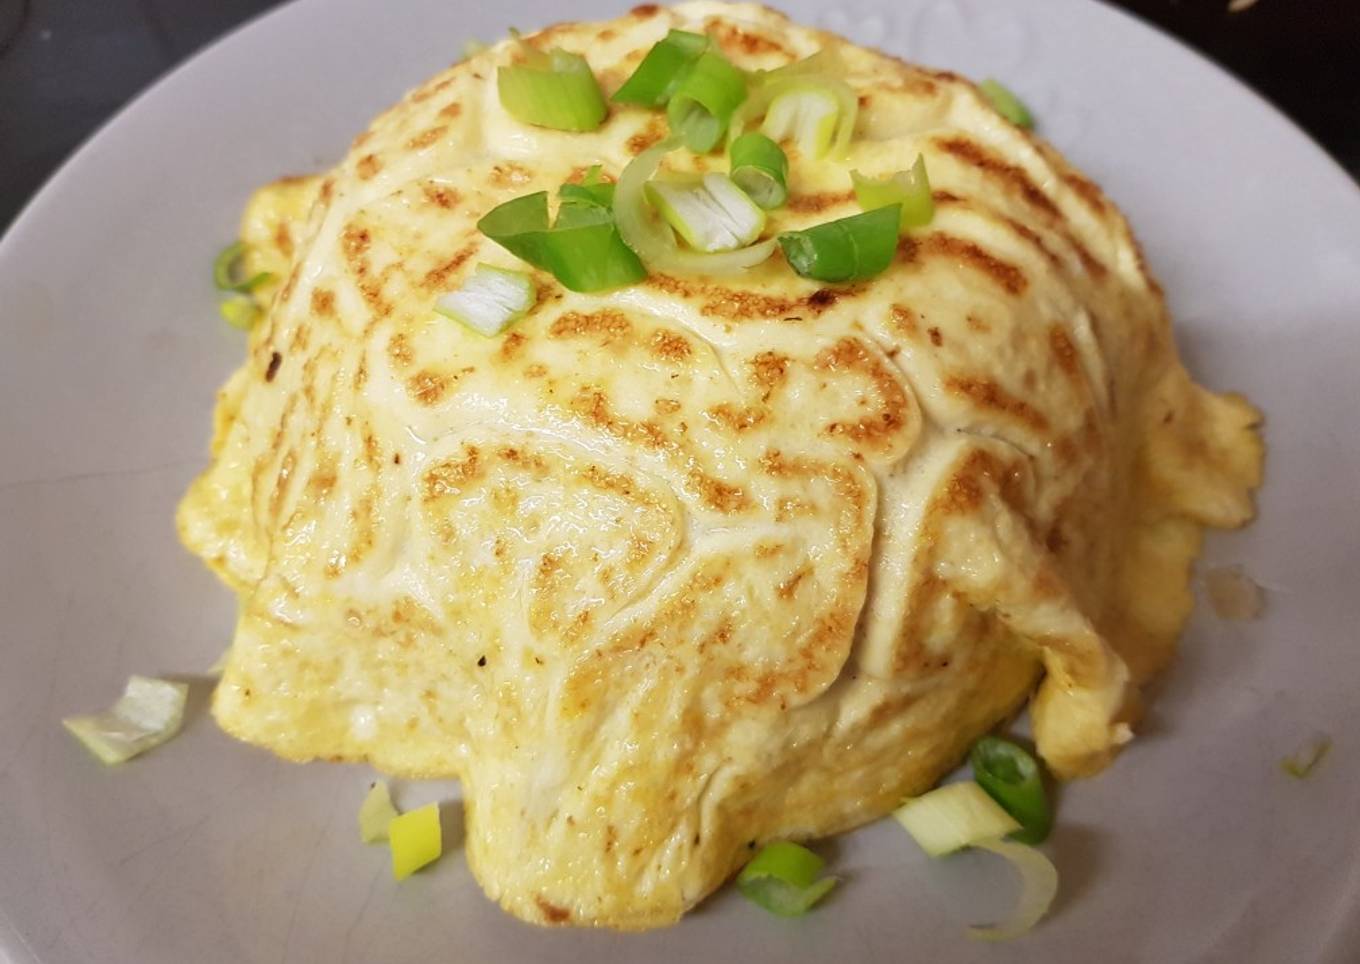 Omurice. So good looking this dish is. 😊